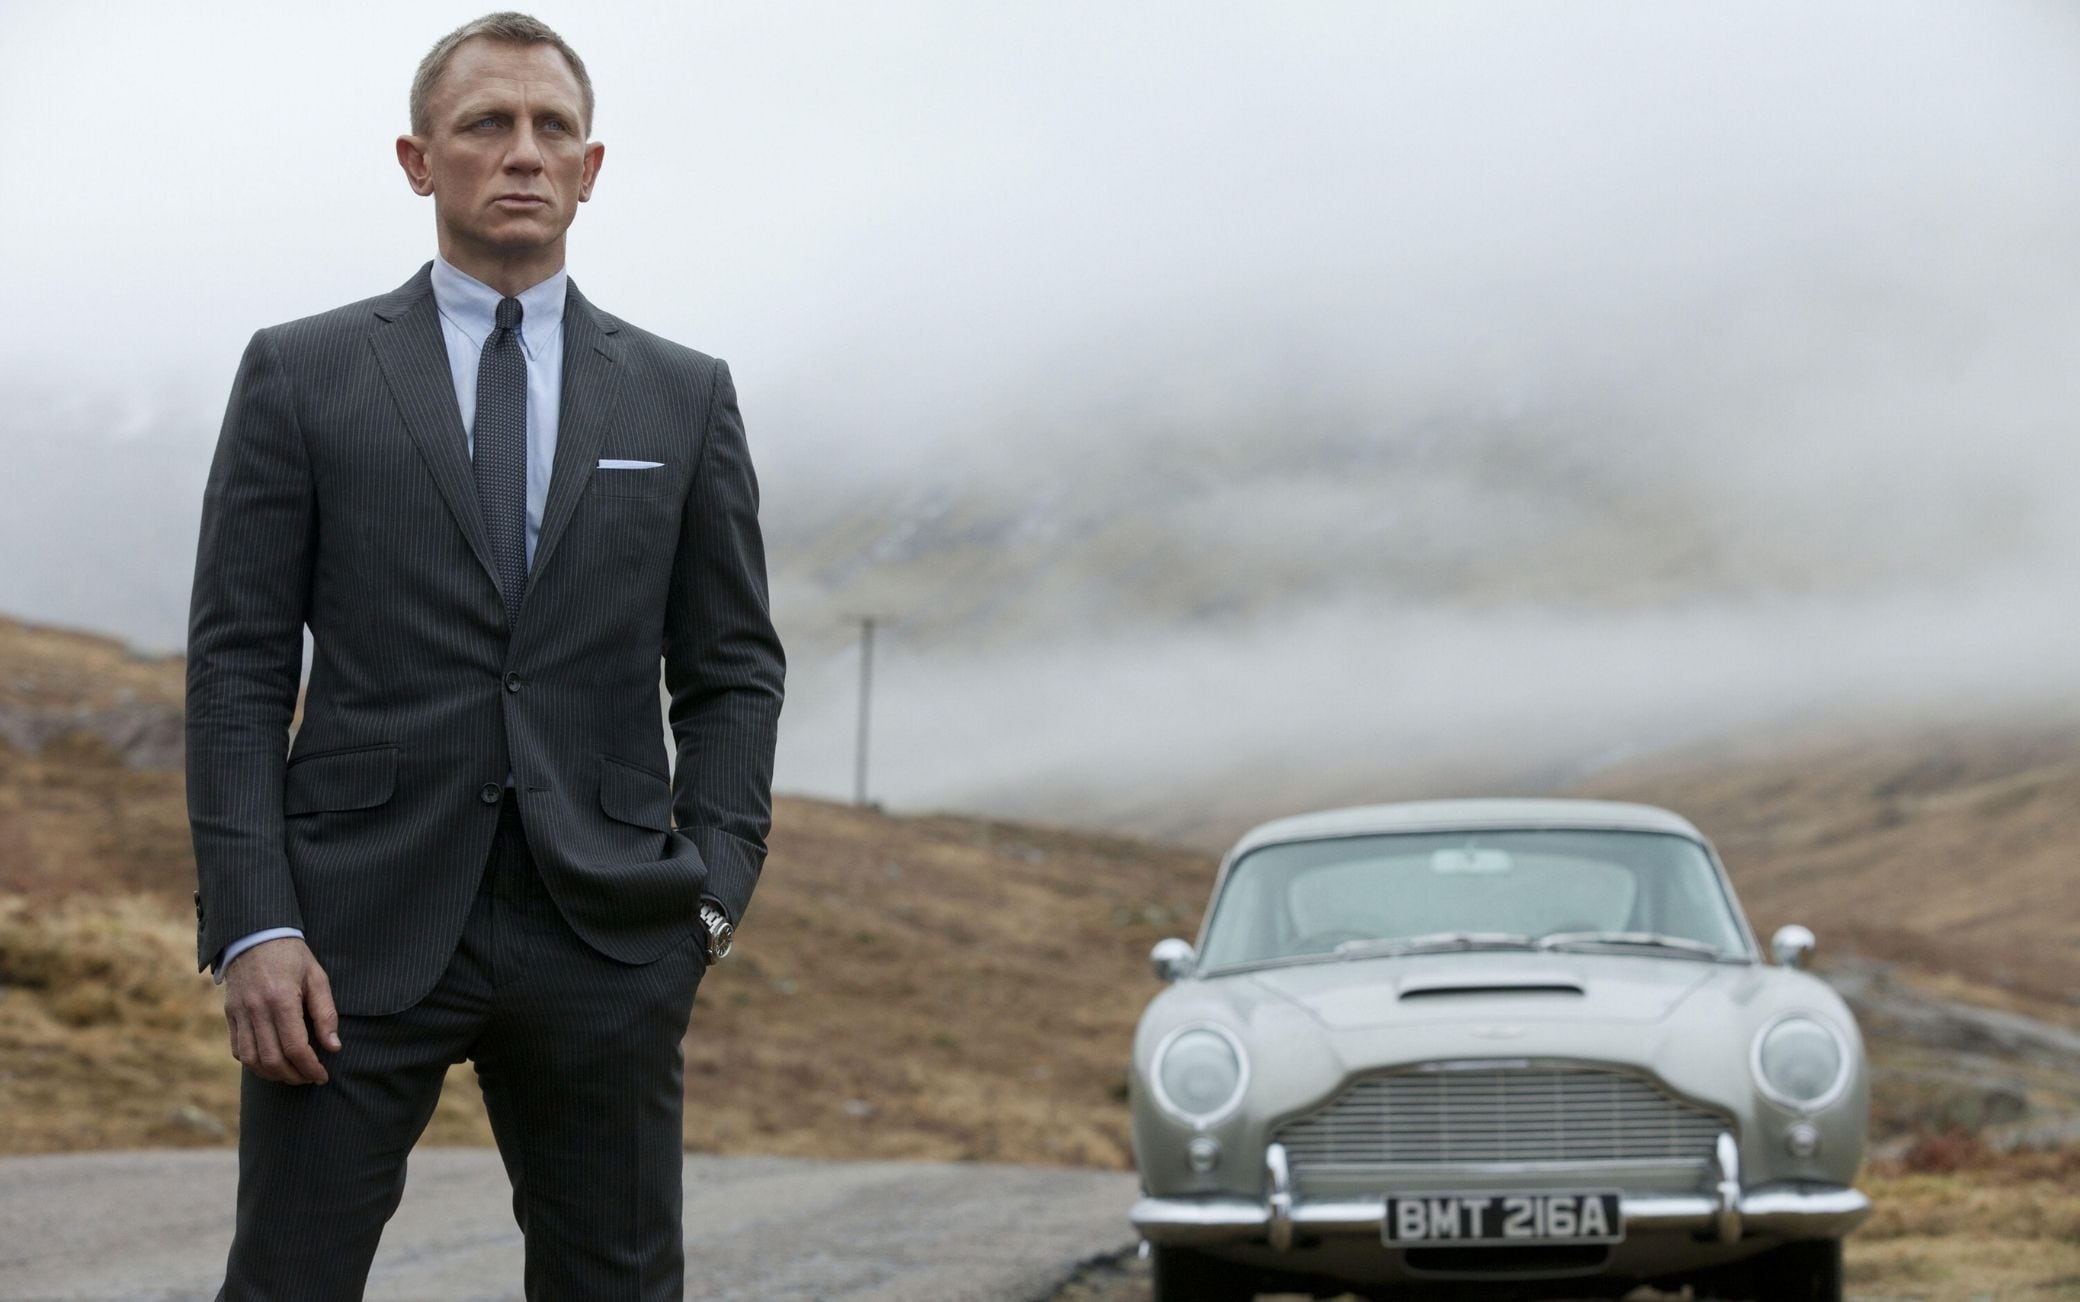 007, Daniel Craig will receive the title of Knight